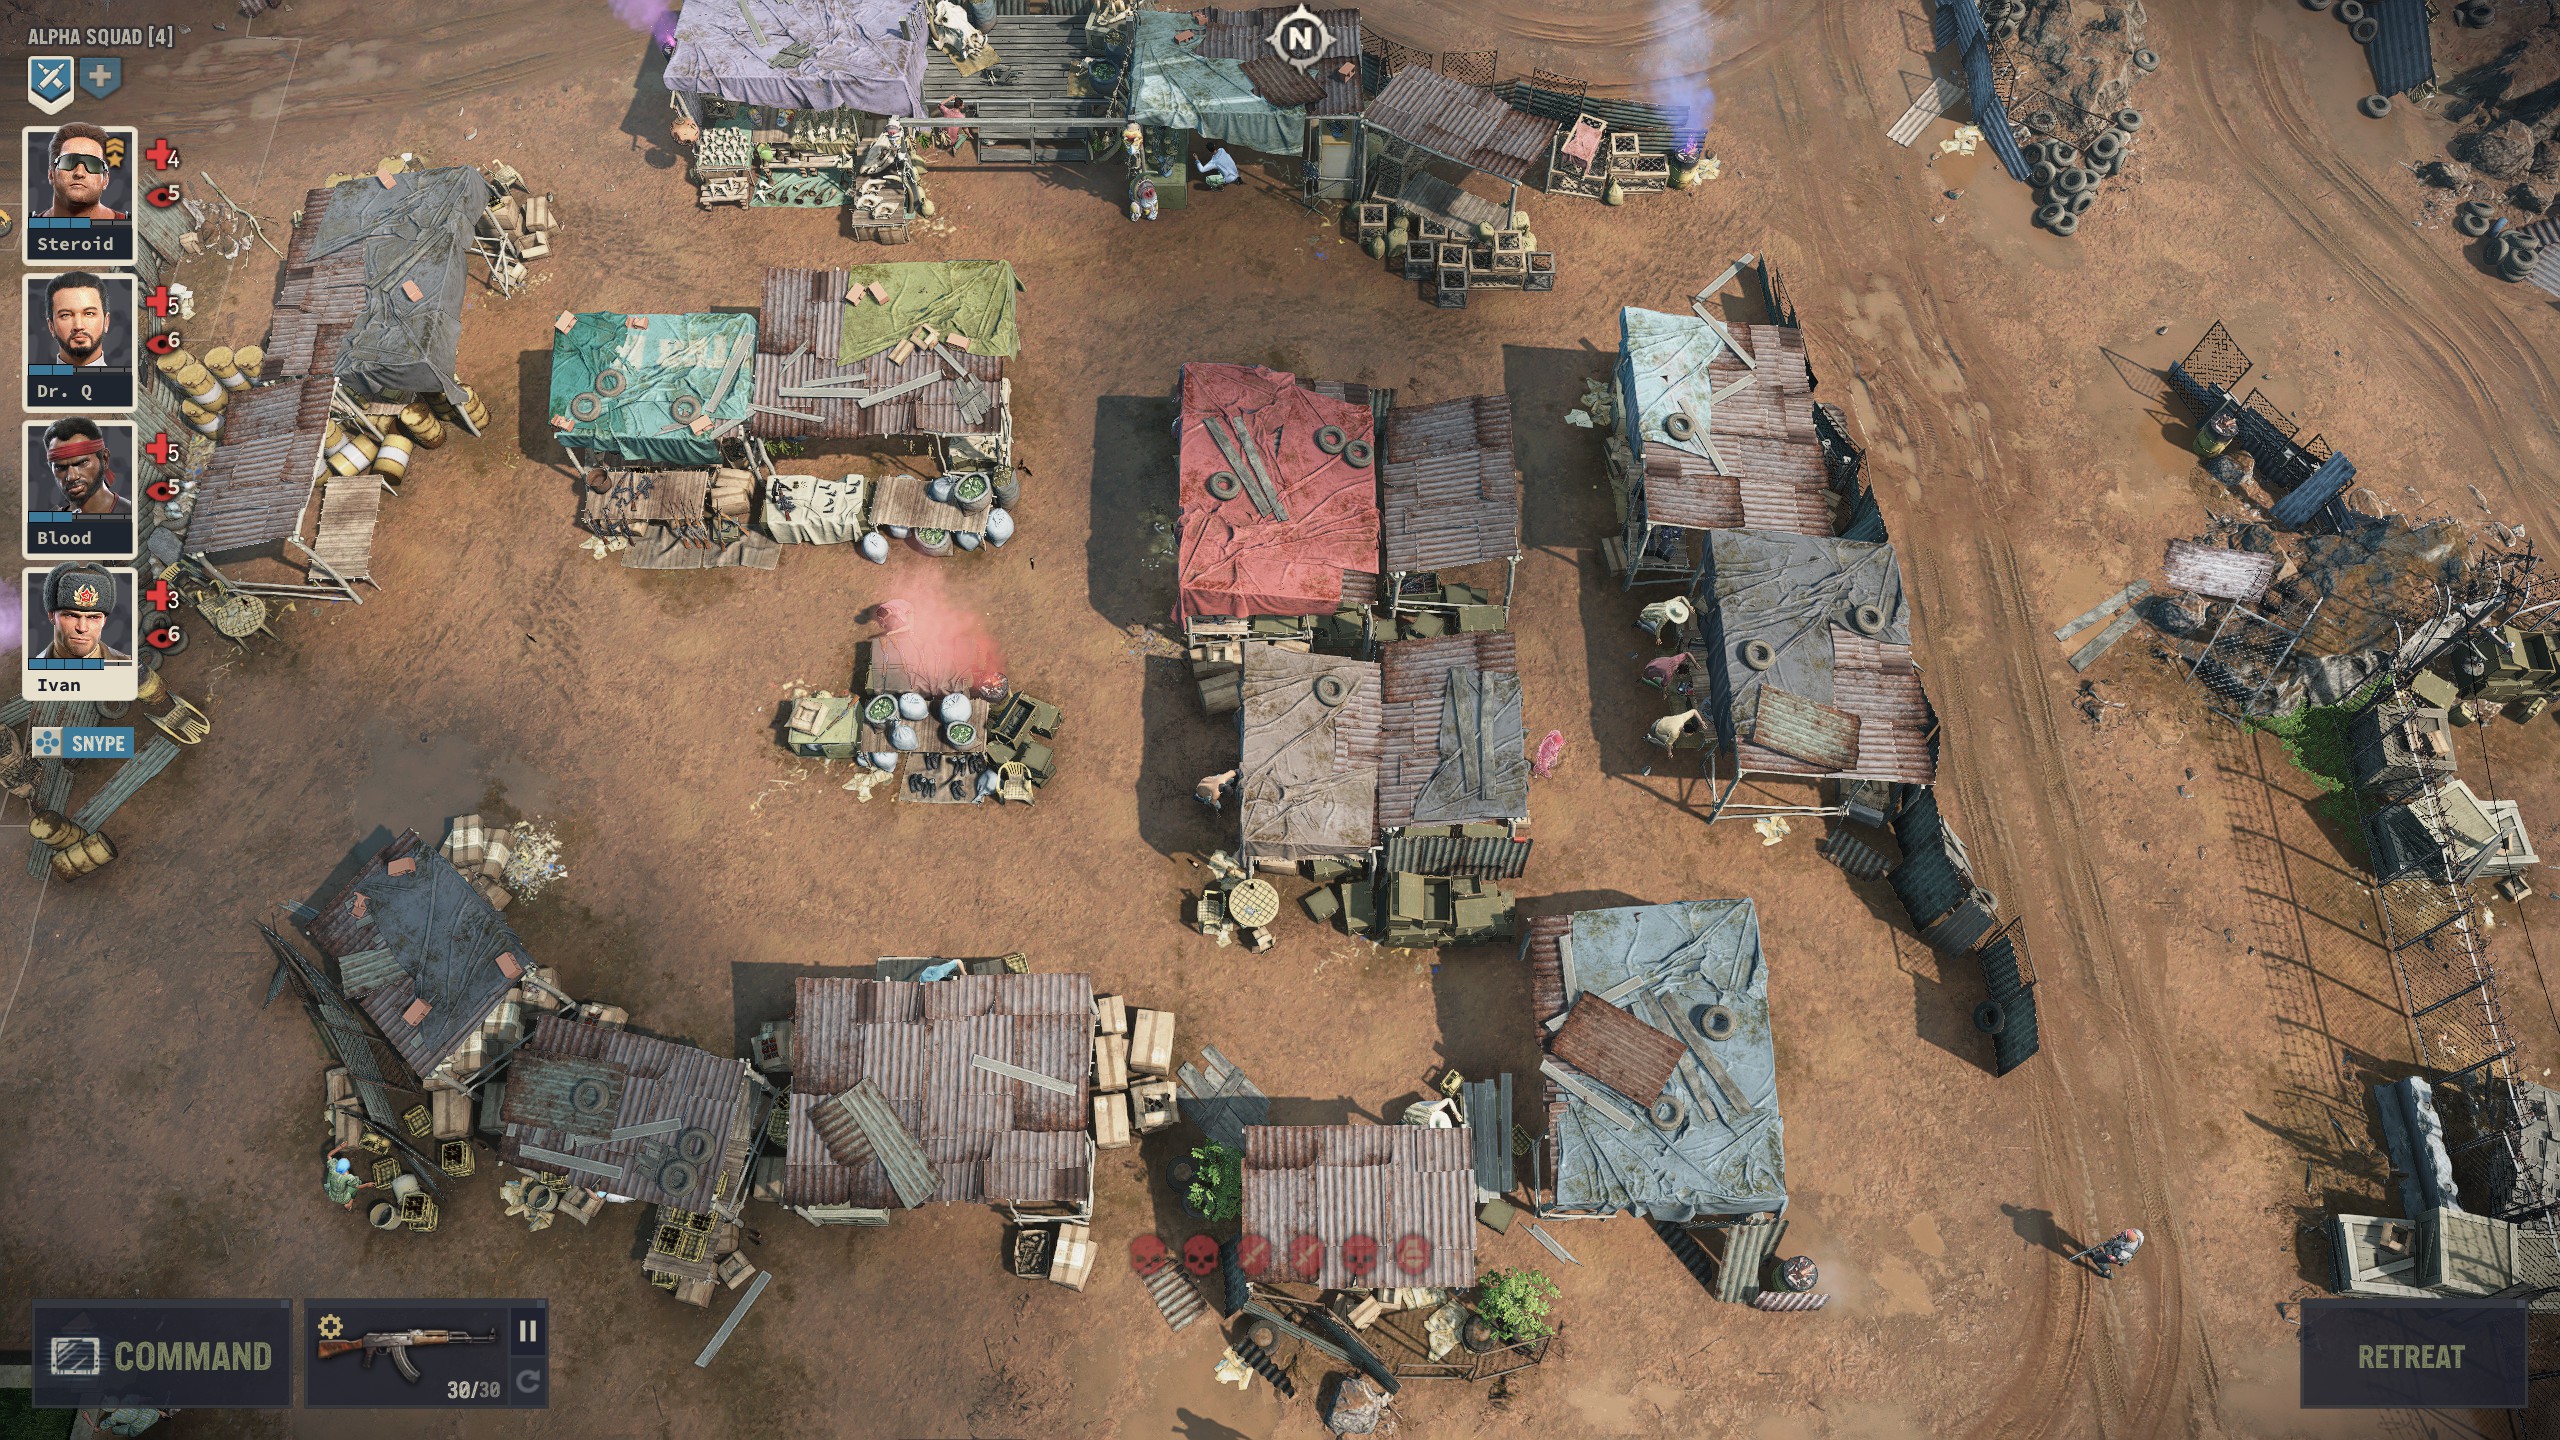 A shanty town in Jagged Alliance 3